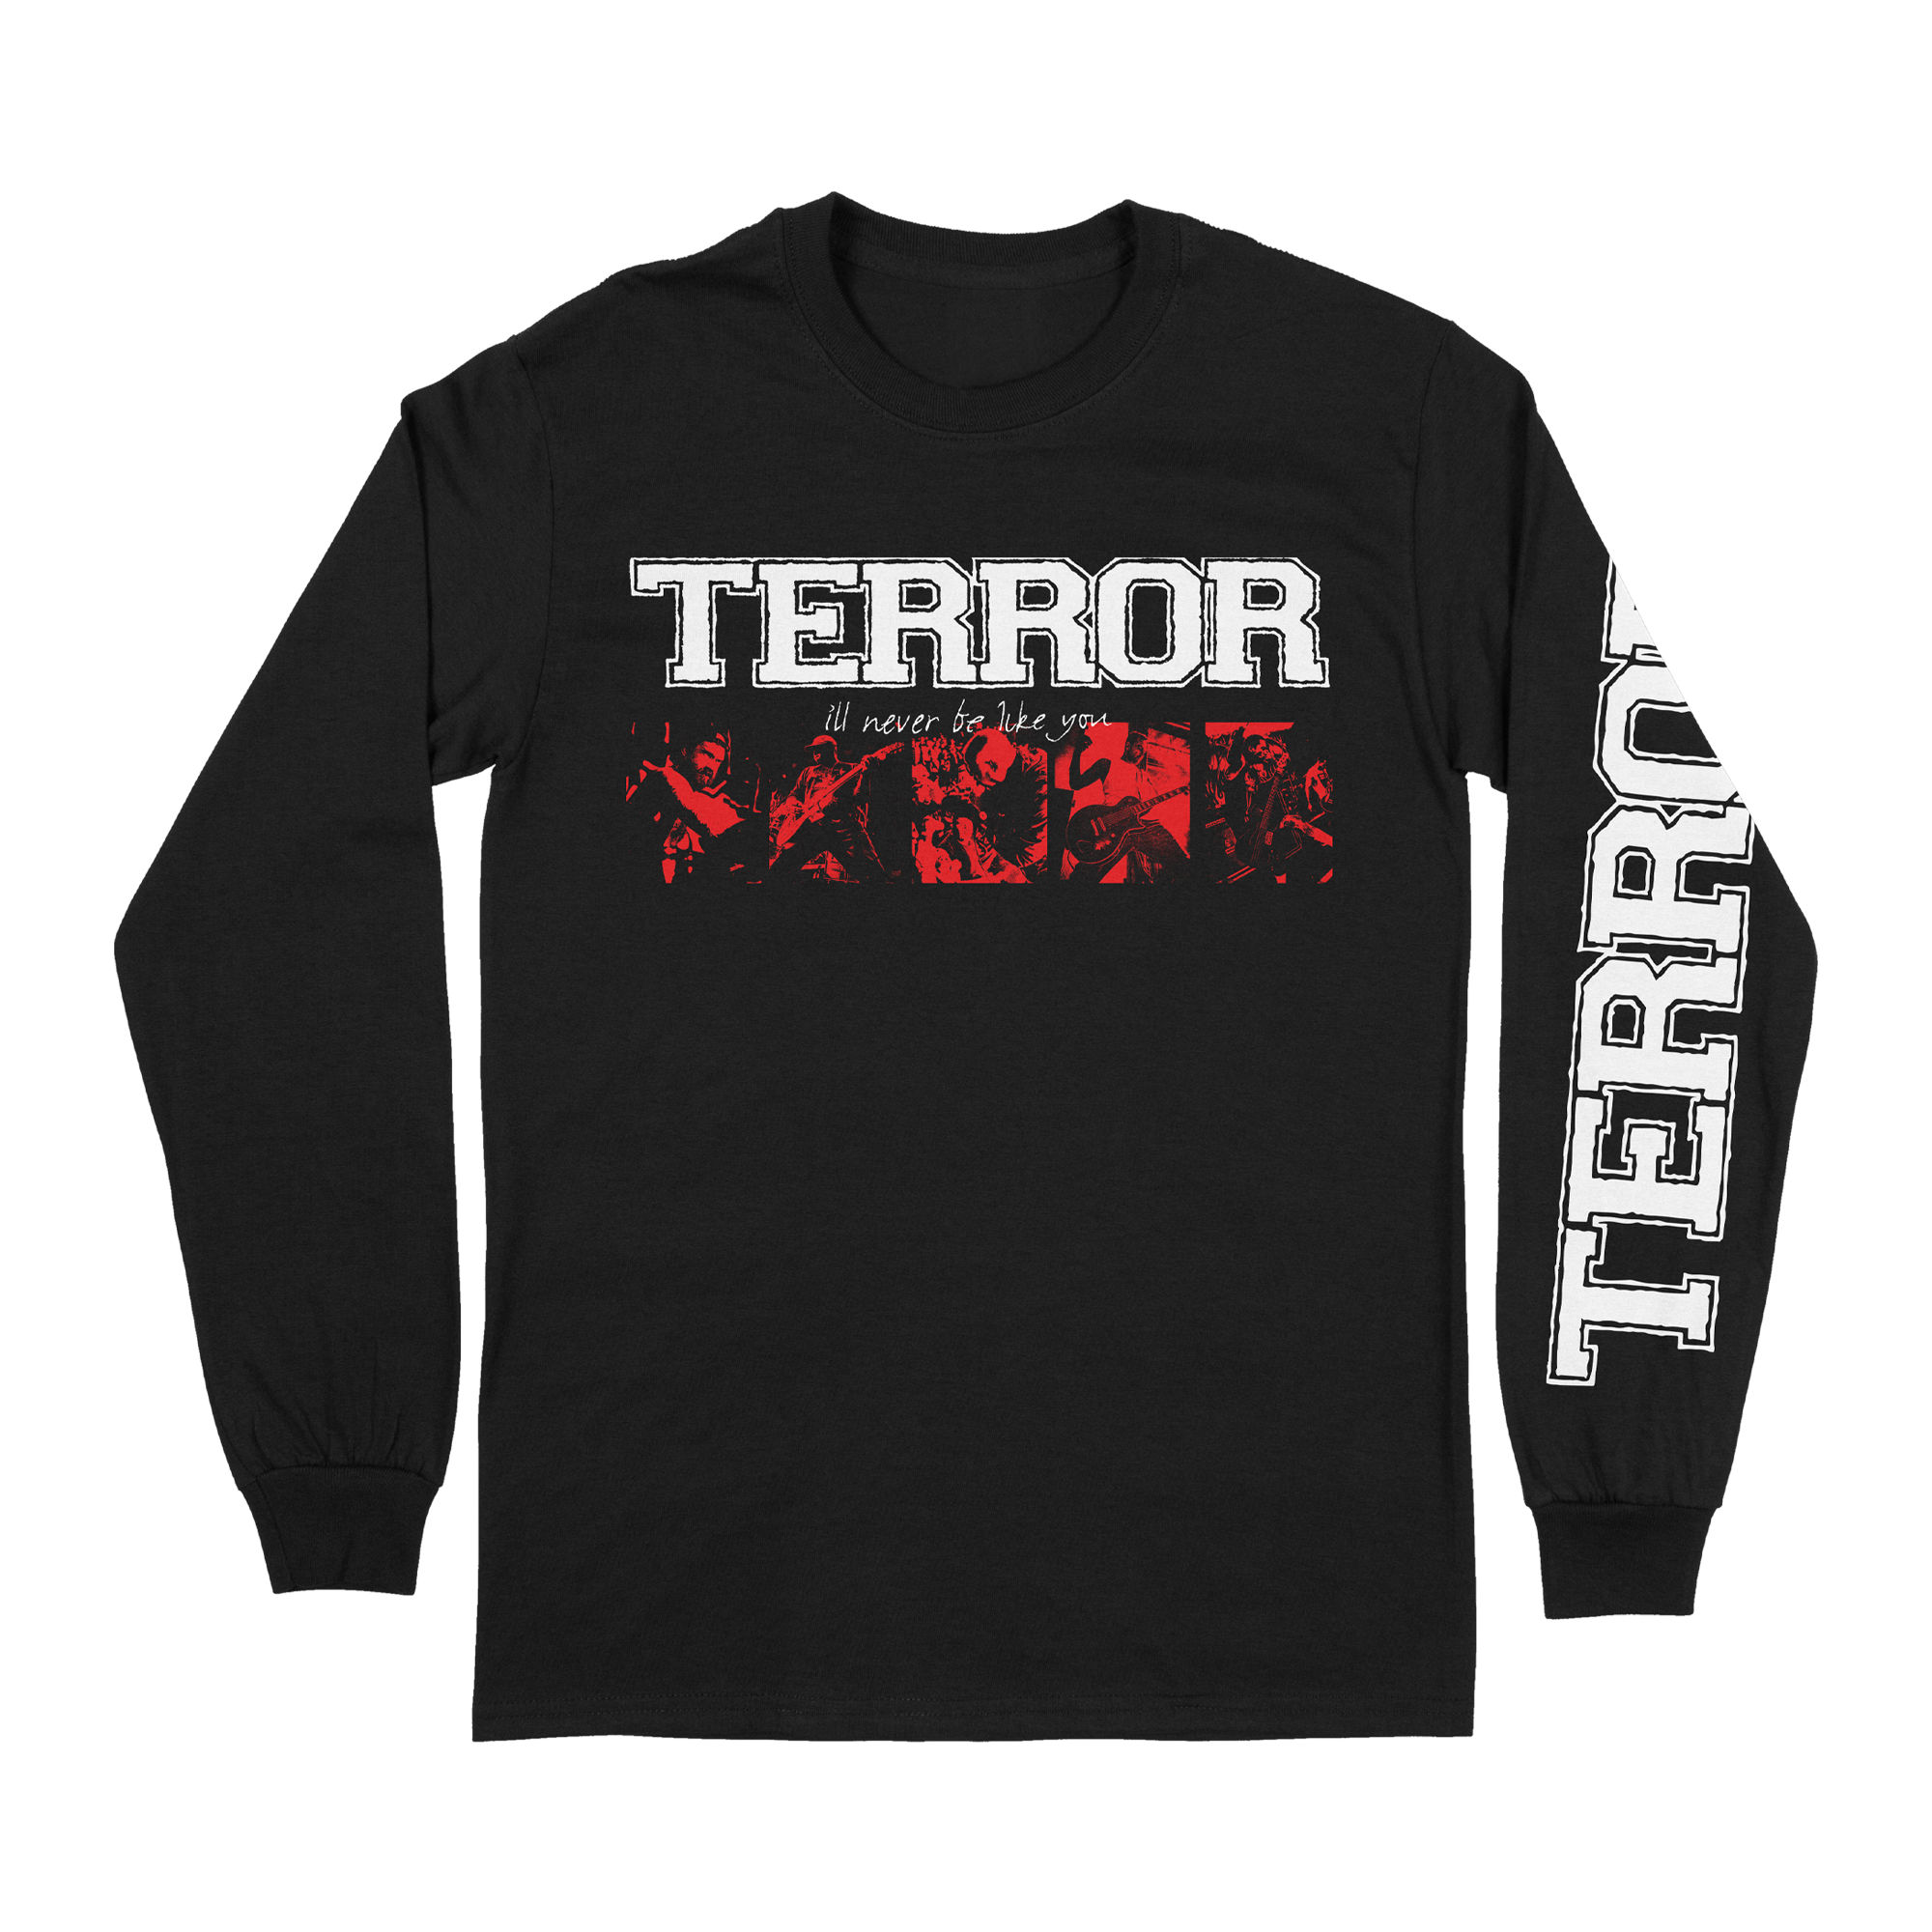 Terror - Lowest of the Low Long Sleeve